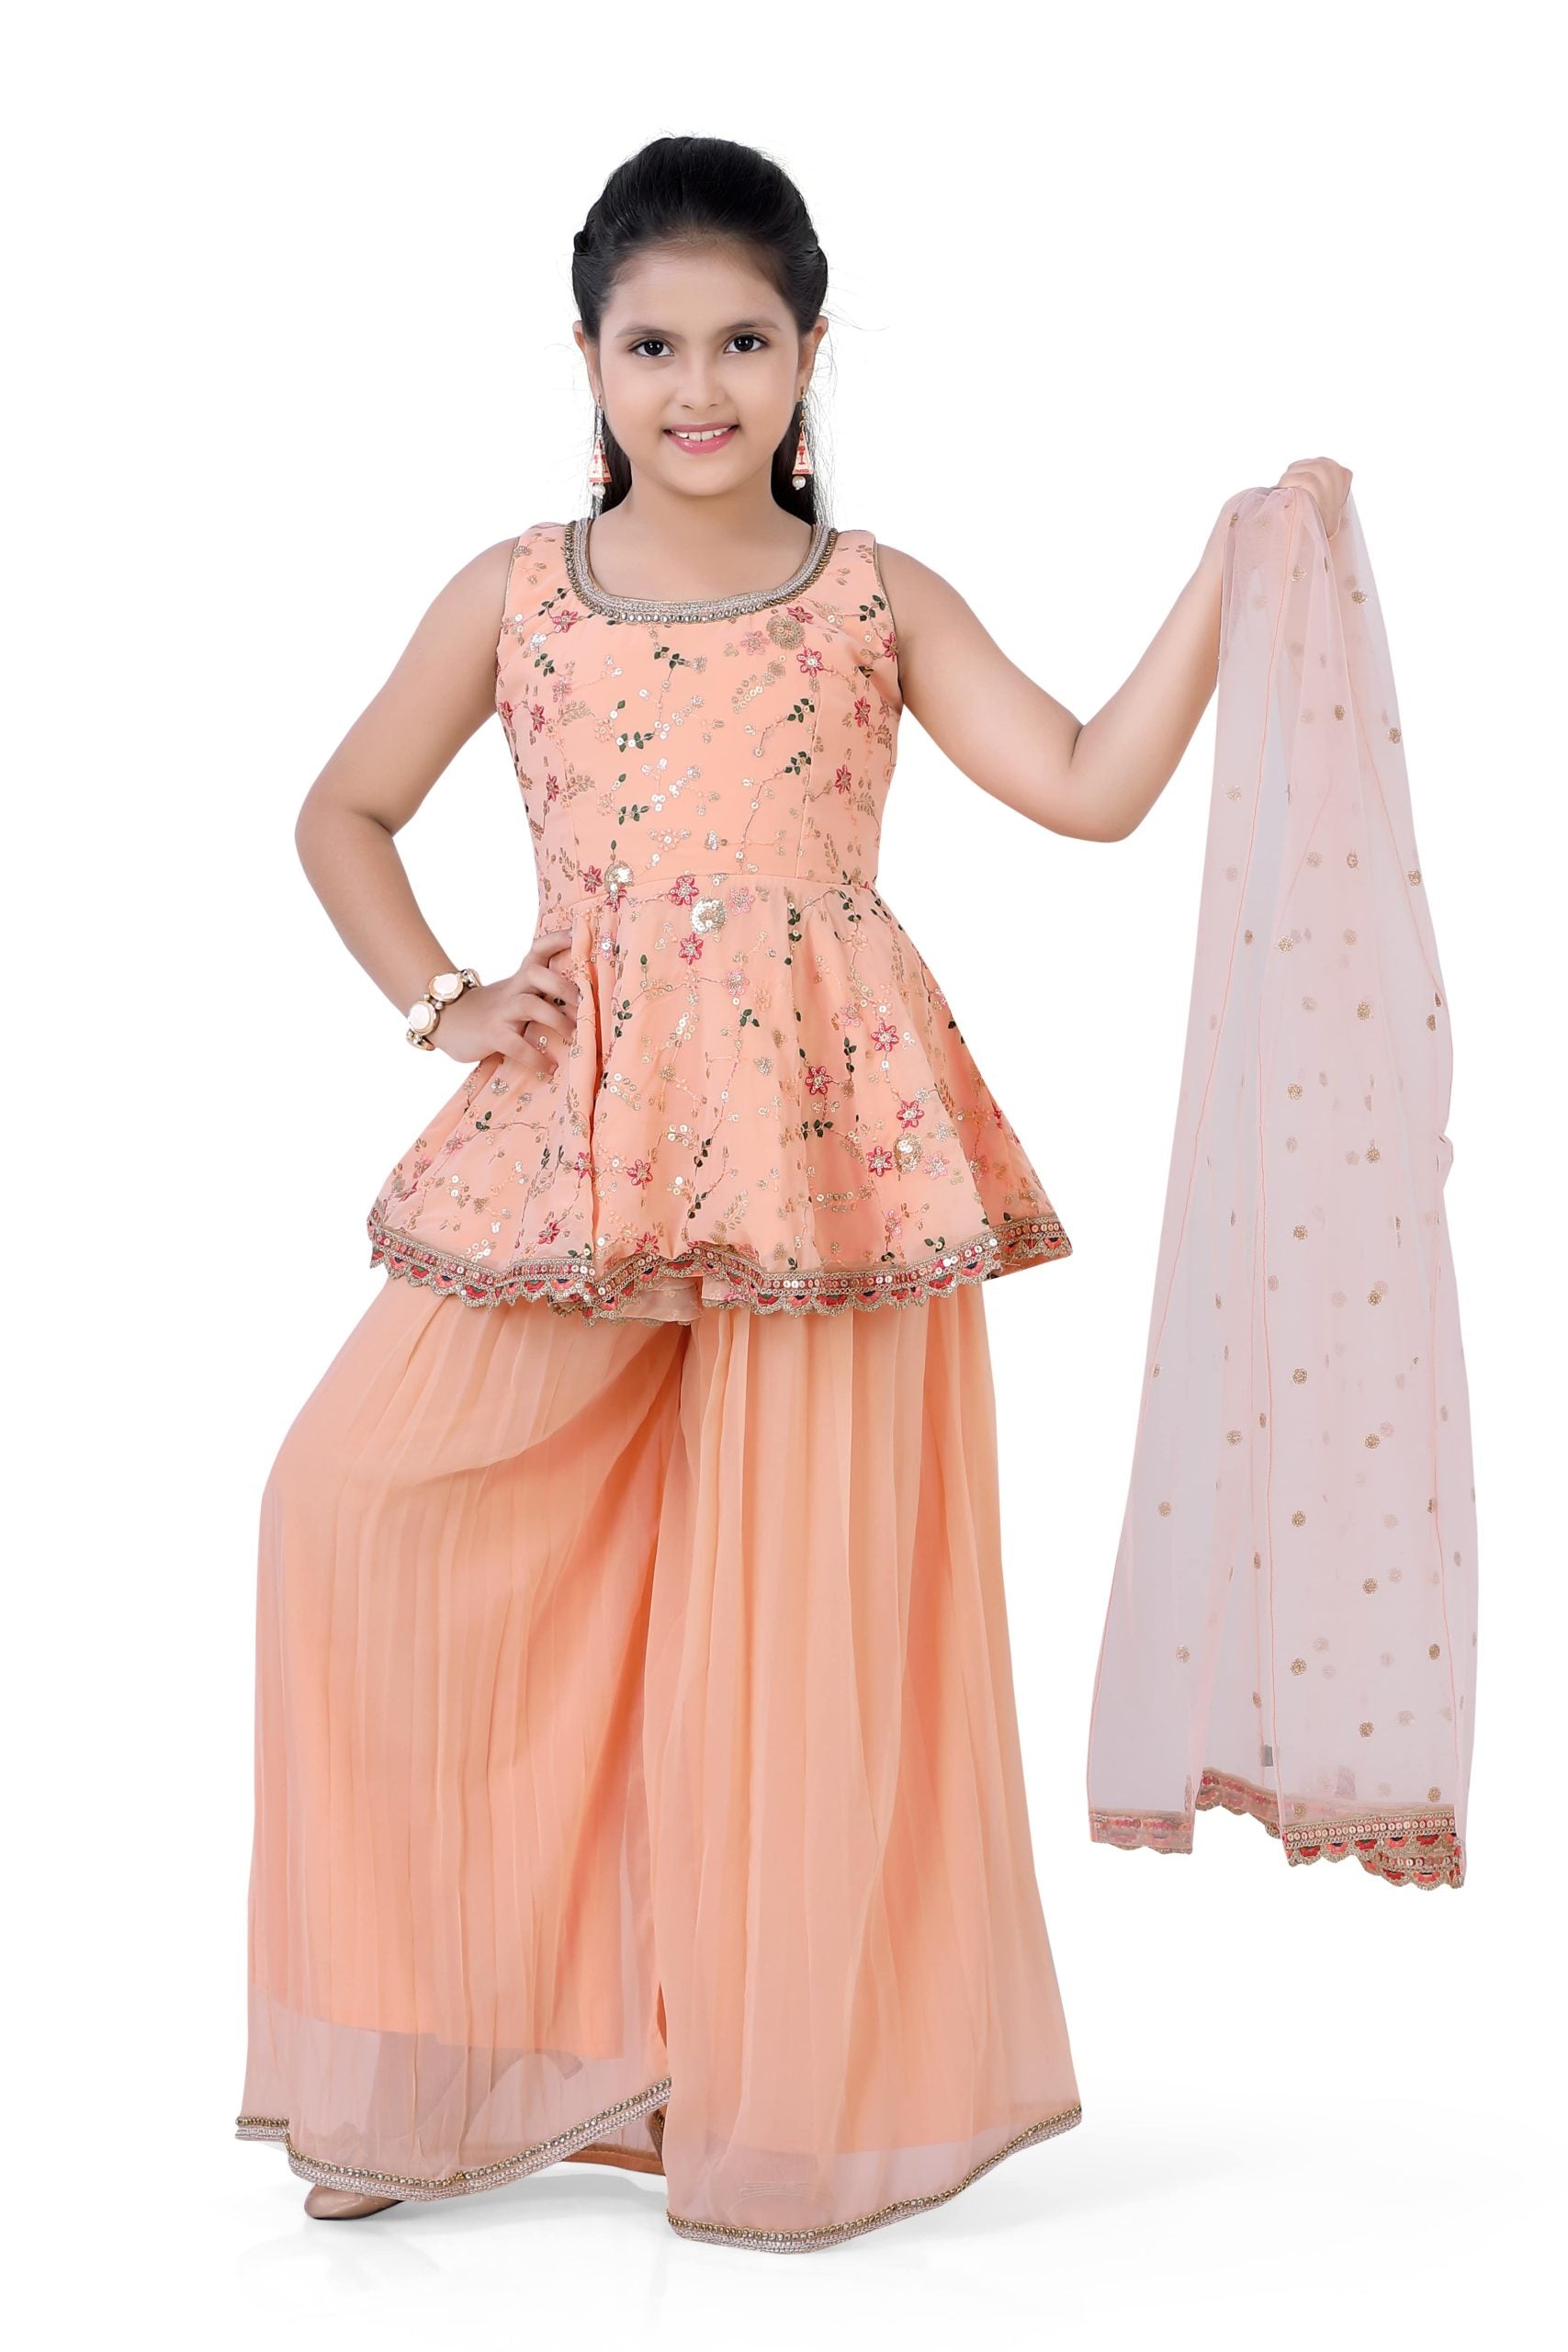 Girls Short Top & Palazzo With Dupatta in Apricot Color